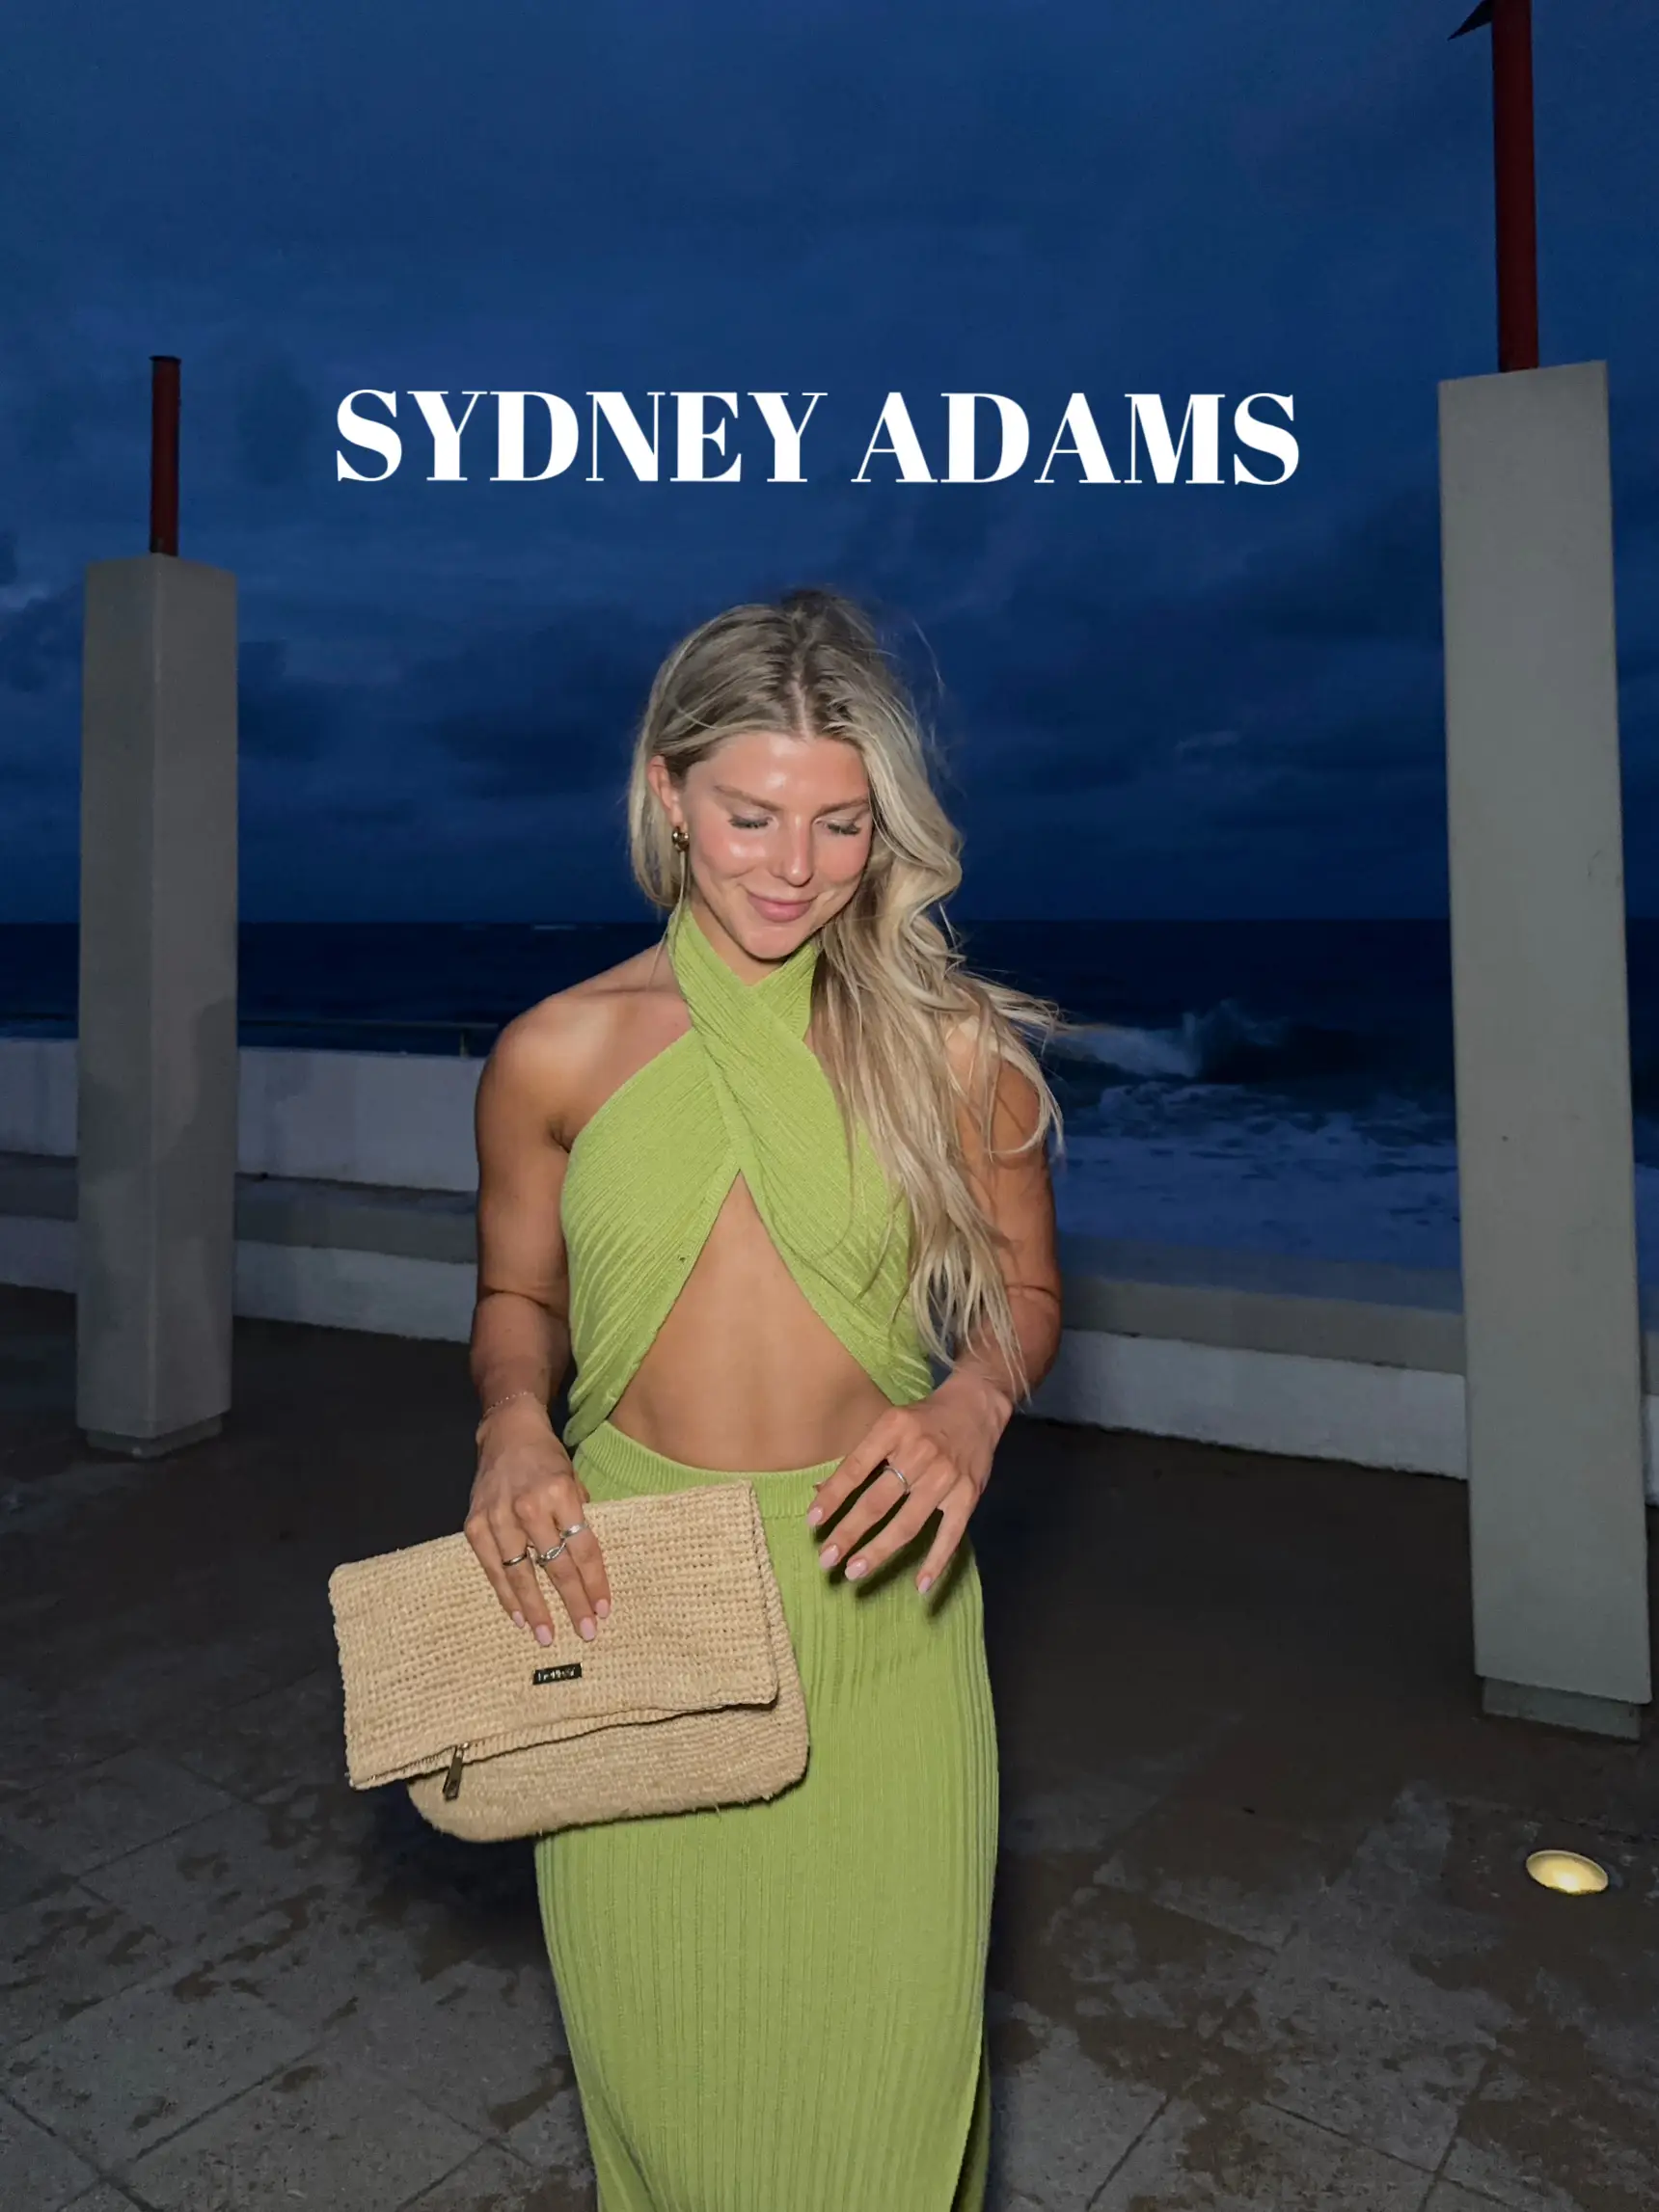 Any snark on Sydney Adams? Her  doesn't have any videos